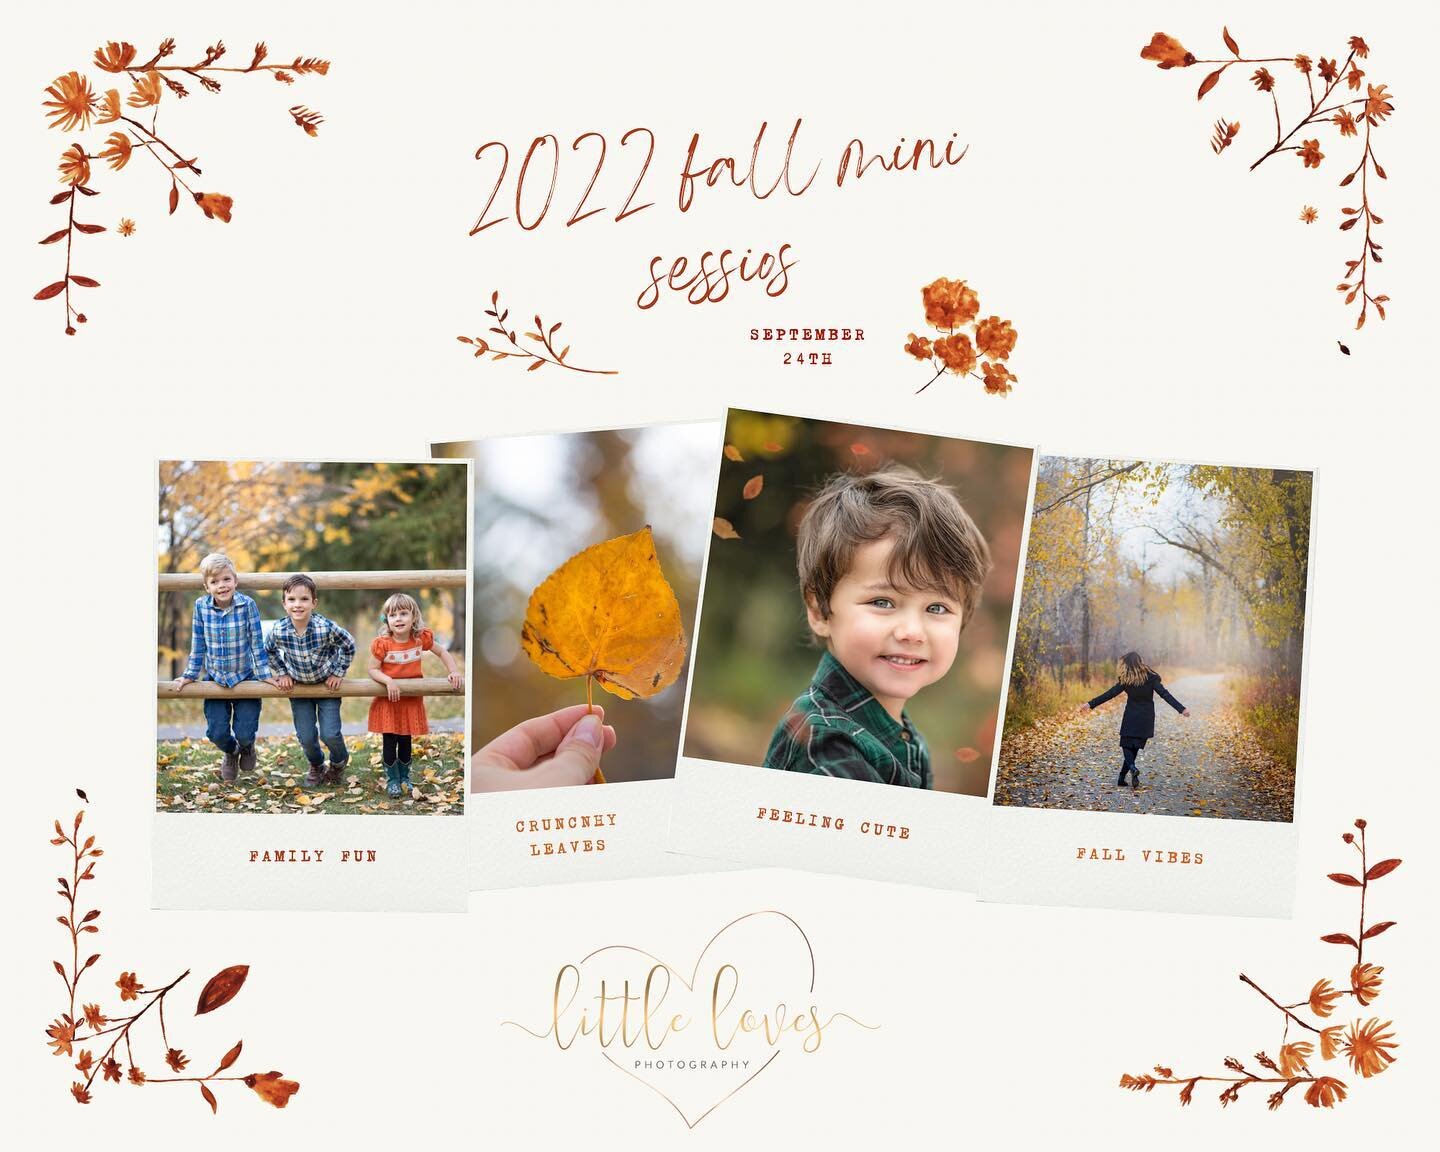 Fall minis are here! Same weekend as last year (last Saturday of September). Click the link in my bio for all the details. Hoping to see you soon!
.
.
.
.
.
.
#calgaryfallminis #fallminis #fallminis2022 #yycfallminis #calgaryphotographer #calgaryfami